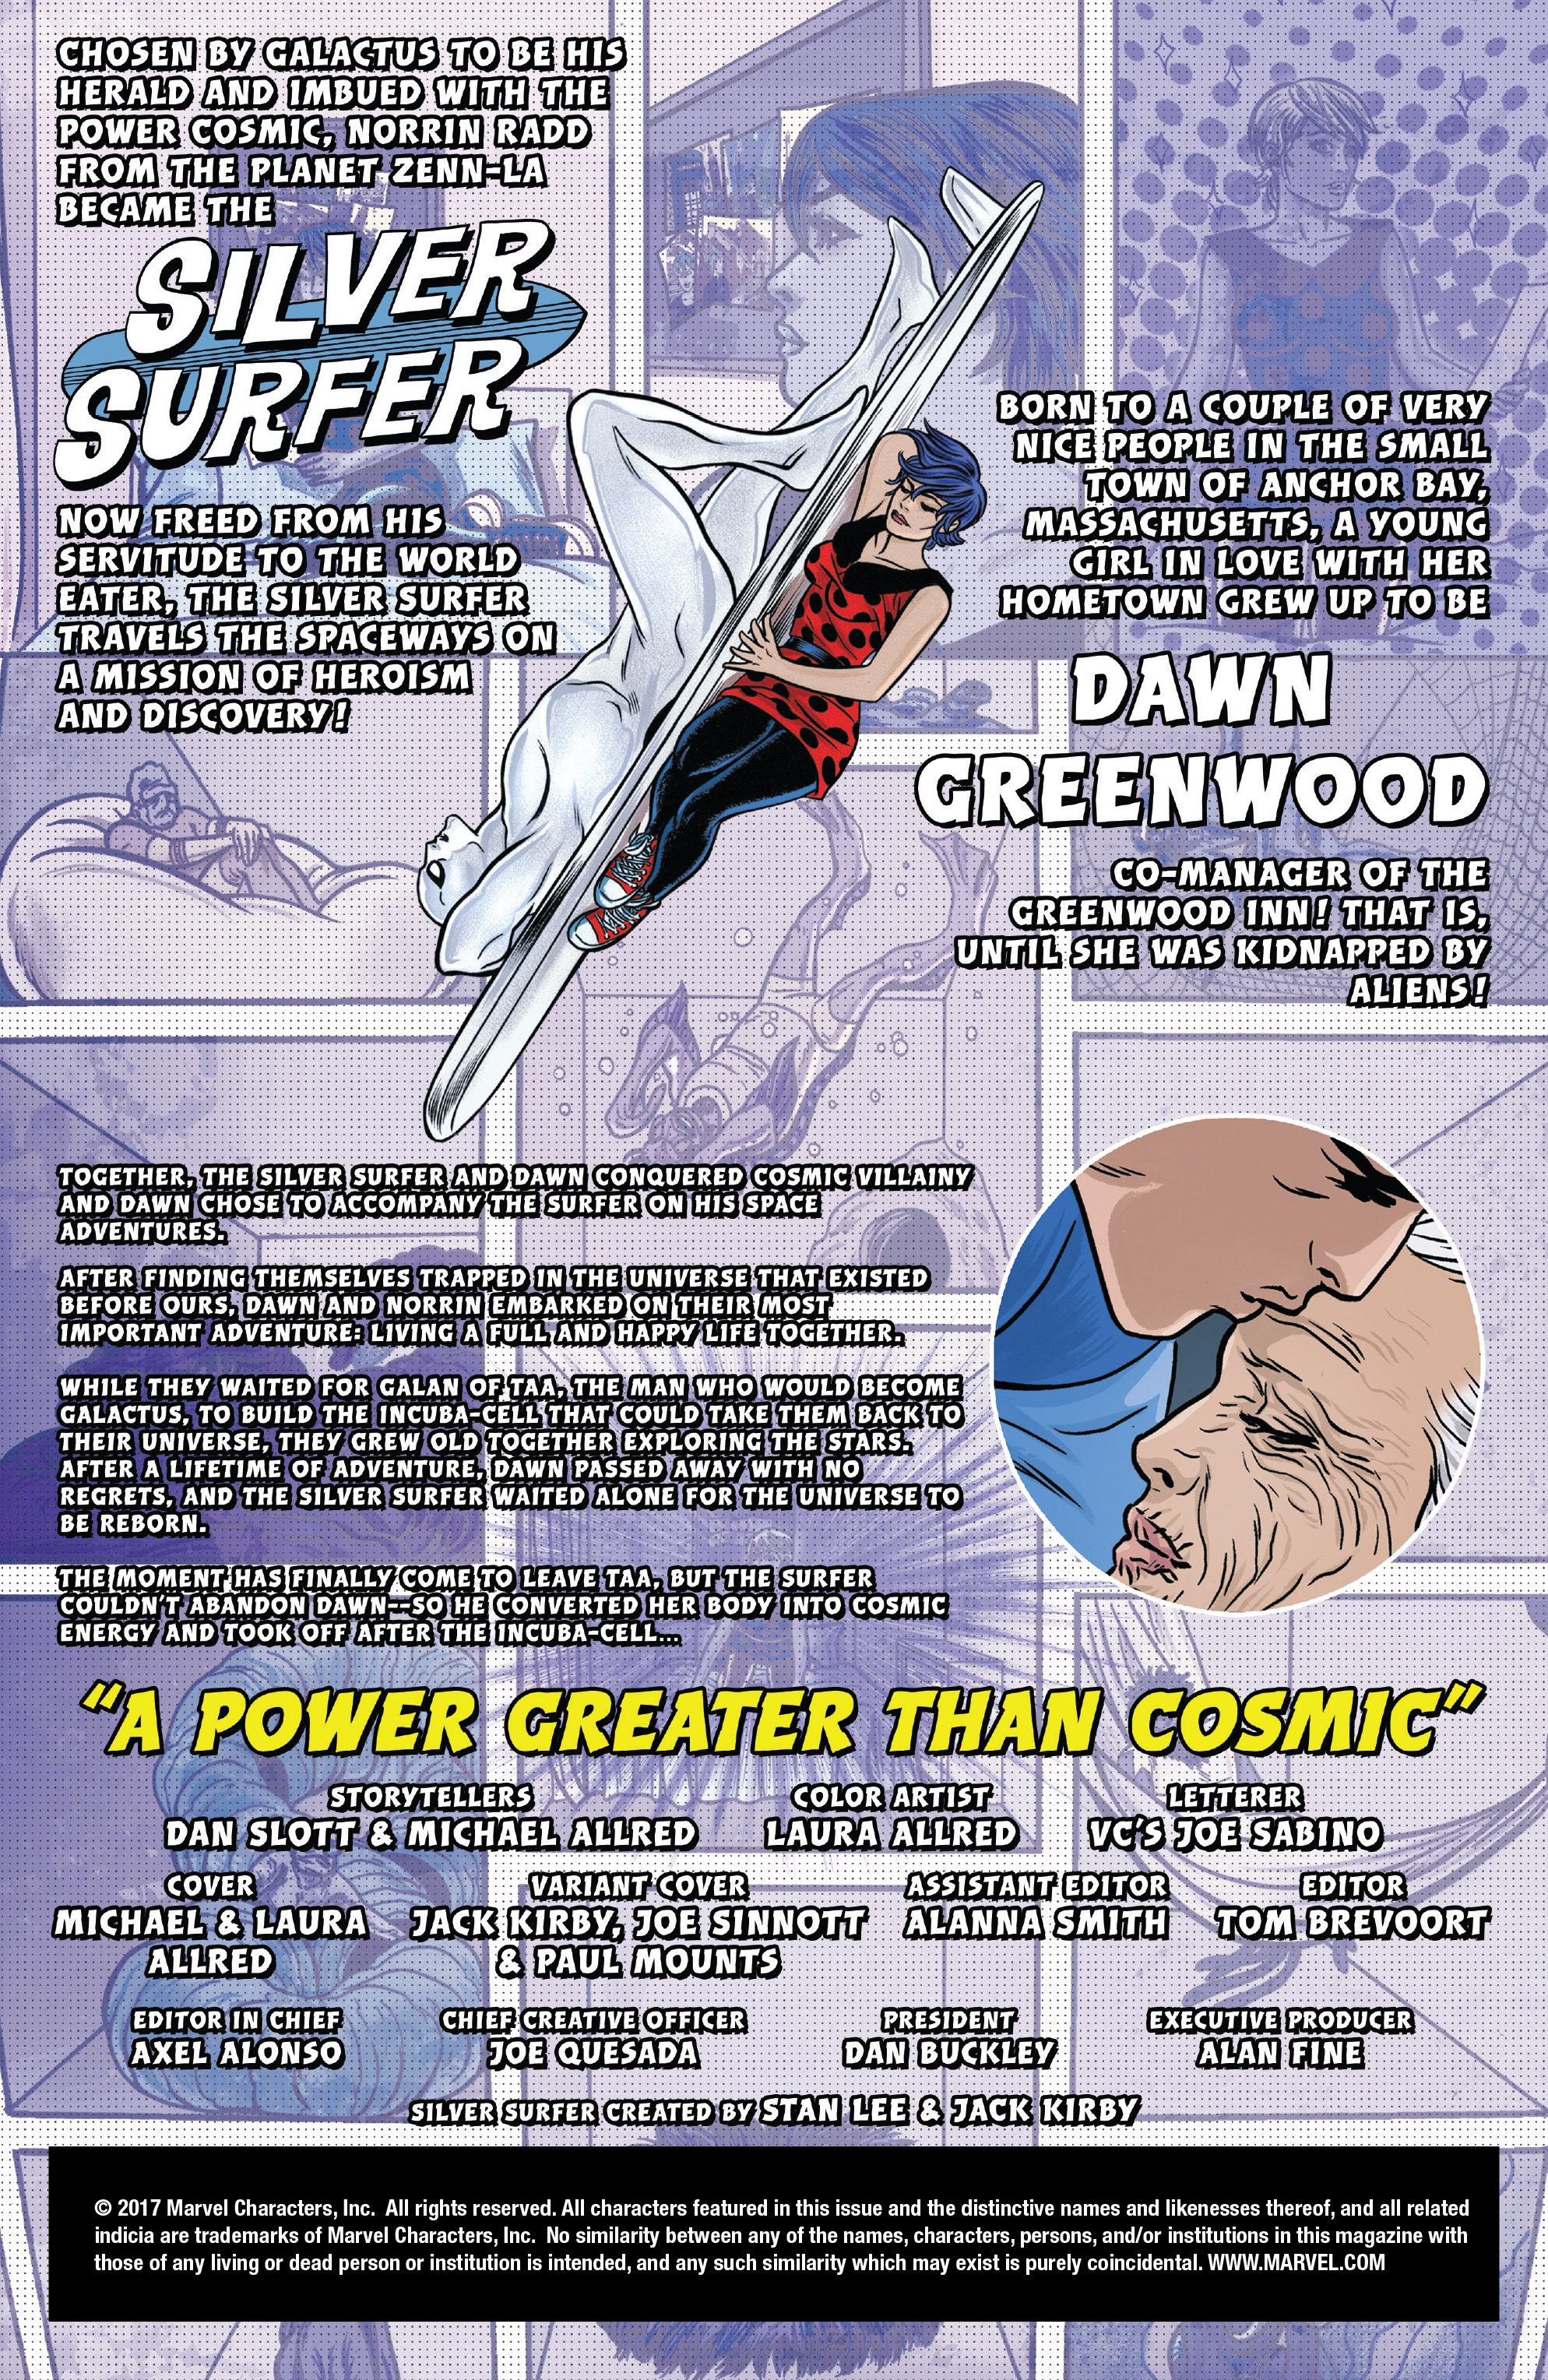 Silver Surfer (2016-): Chapter 14 - Page 2